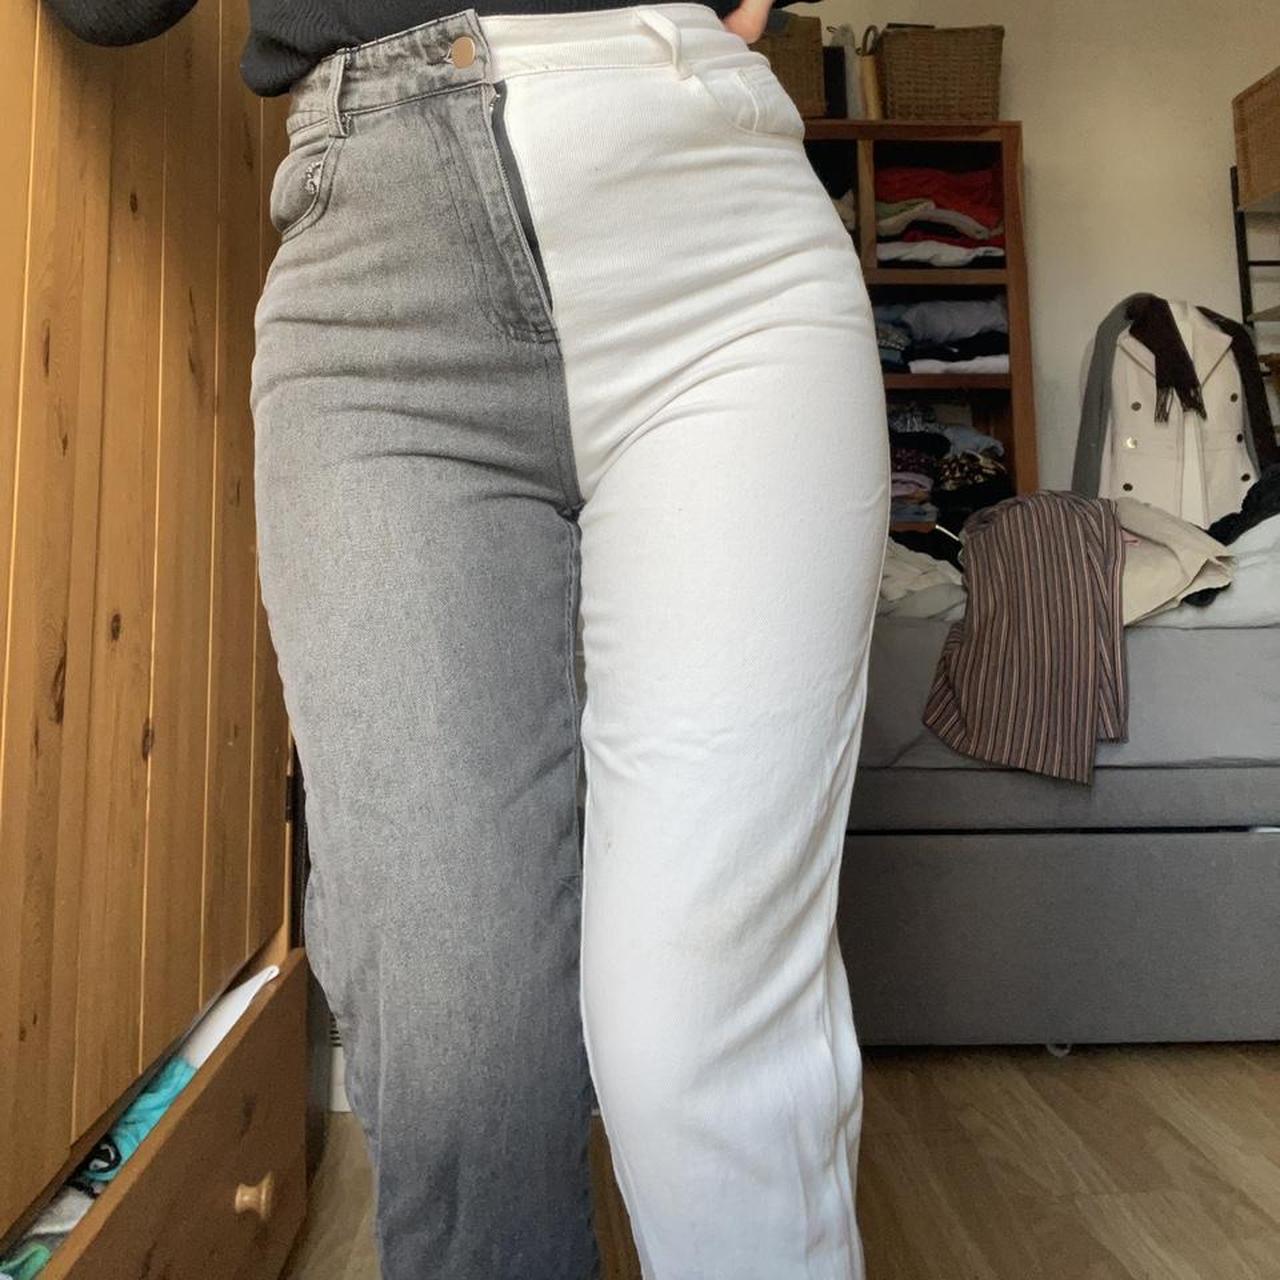 SHEIN Women's Black and White Jeans | Depop